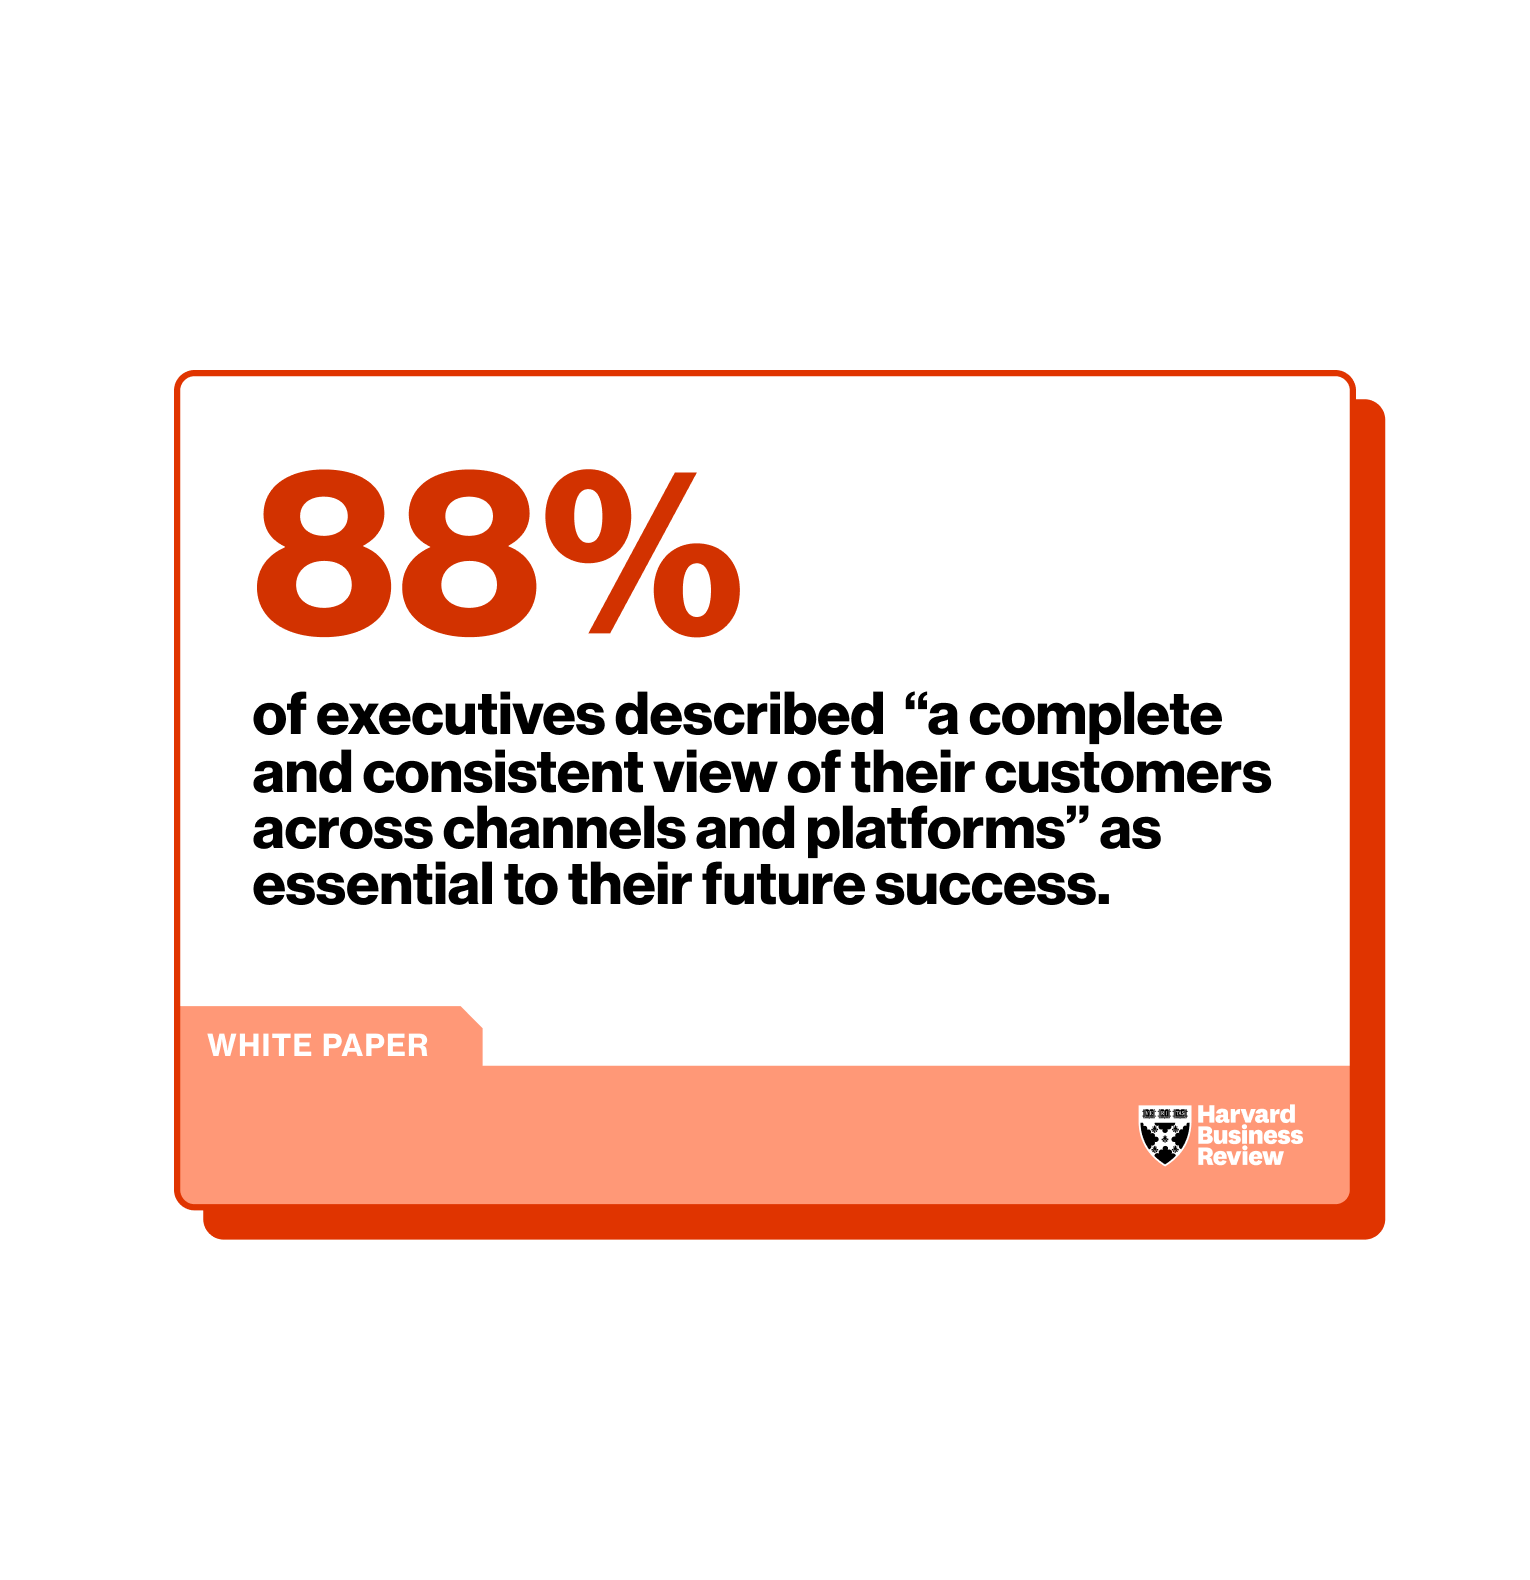 88 percent of executives describe "a complete and consistent view of their customers across channels and platforms" as essential to their future success.